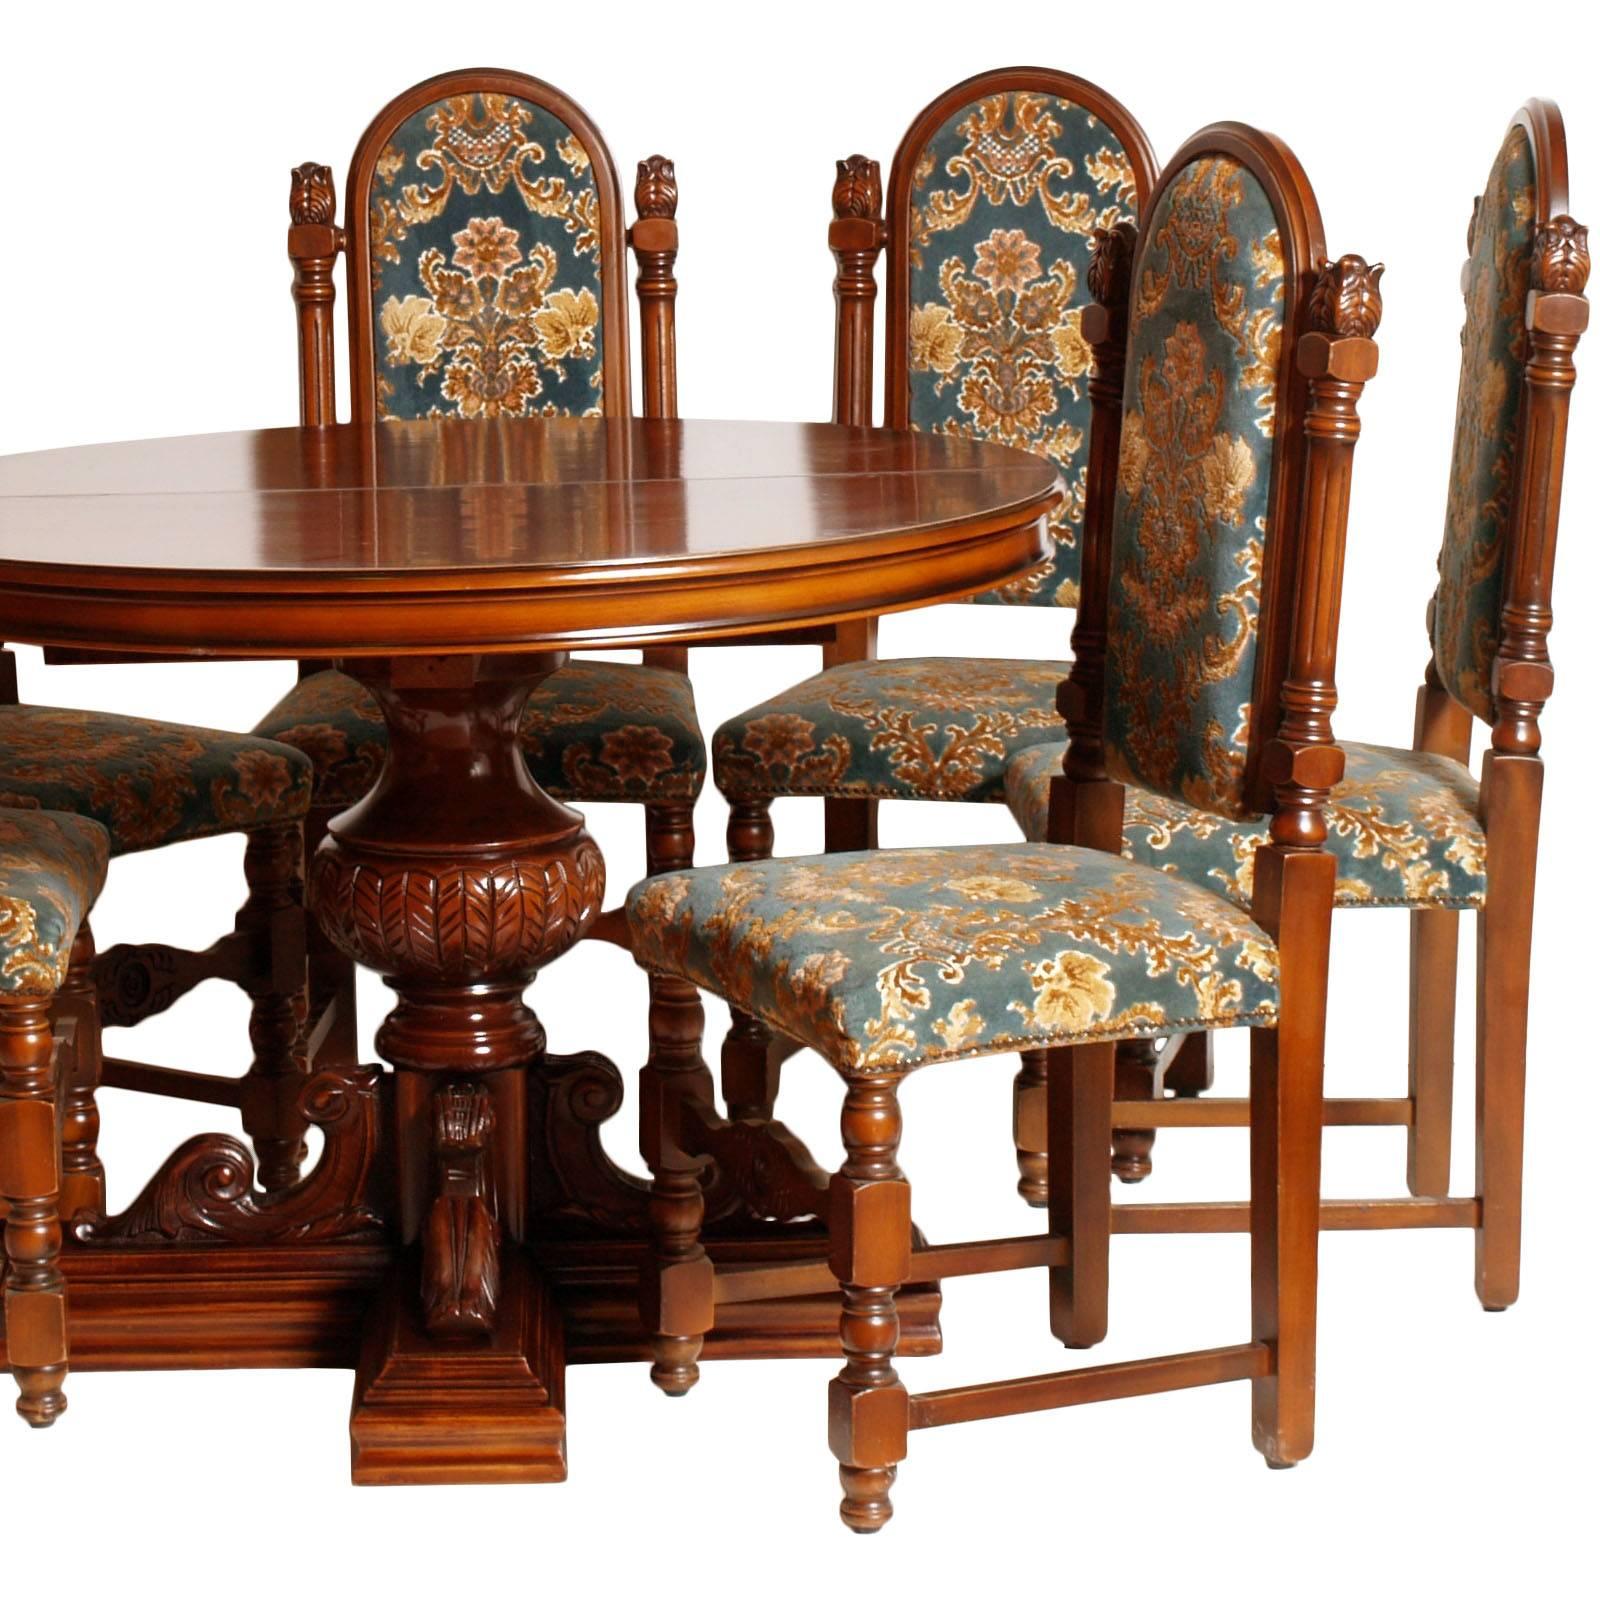 
A Michele Bonciani early 20th century Tuscany dining room set, Renaissance style, all solid walnut and carved walnut, wax-polished
An important classic dining room set with a beautiful patina, very elegant in spite of the massive structure of the